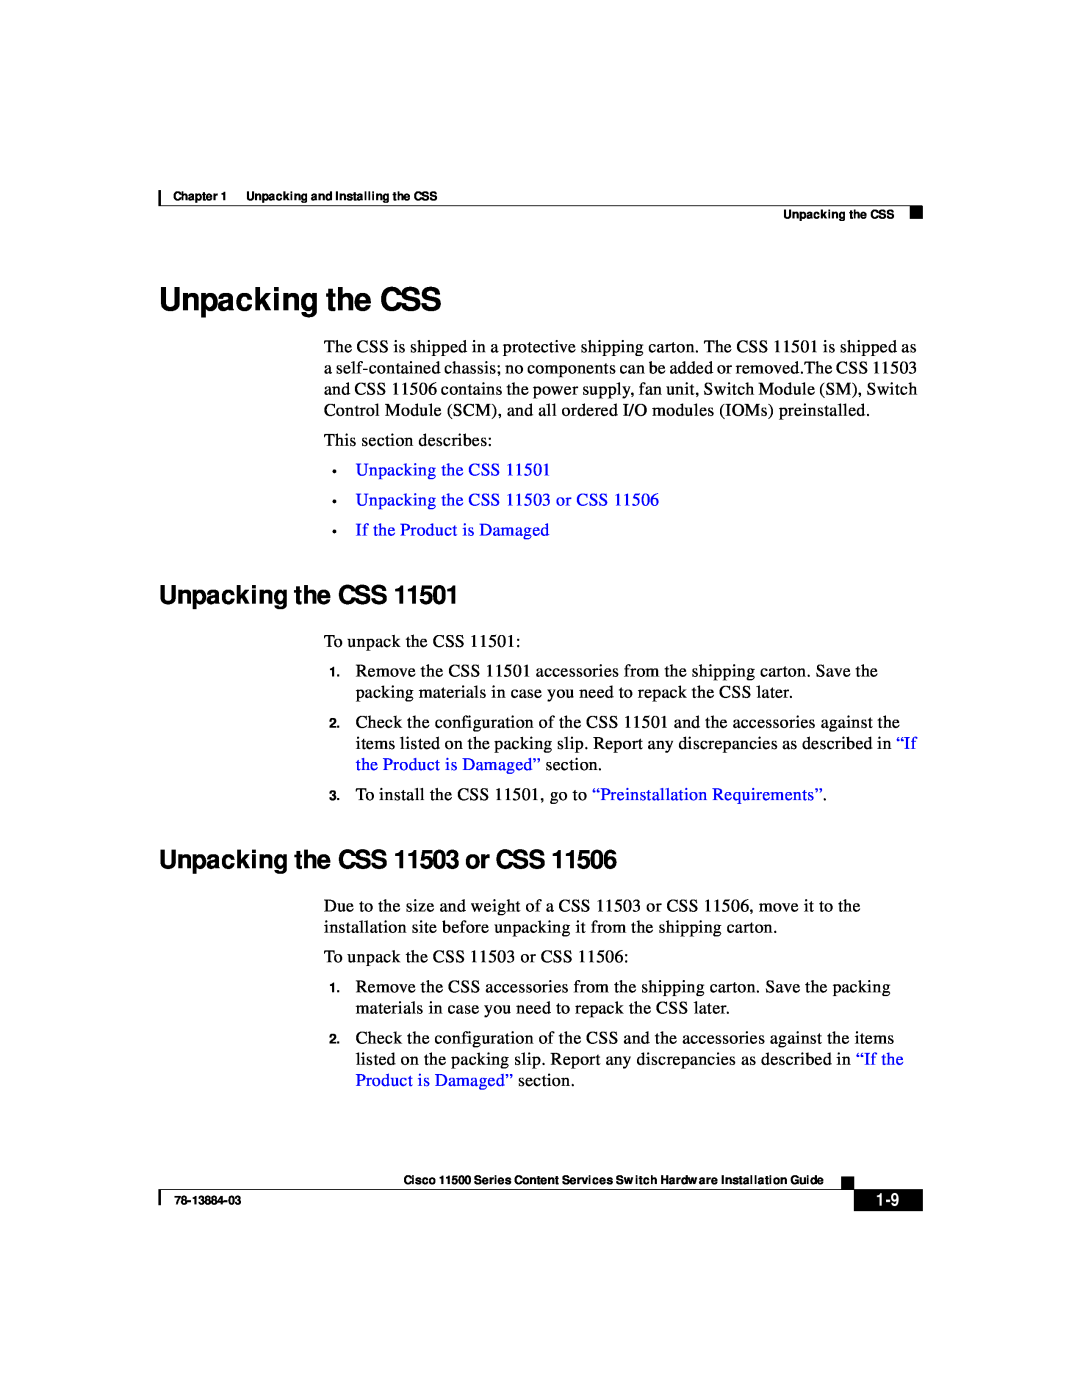 Cisco Systems 11500 Series manual Unpacking the CSS Unpacking the CSS 11503 or CSS, If the Product is Damaged 